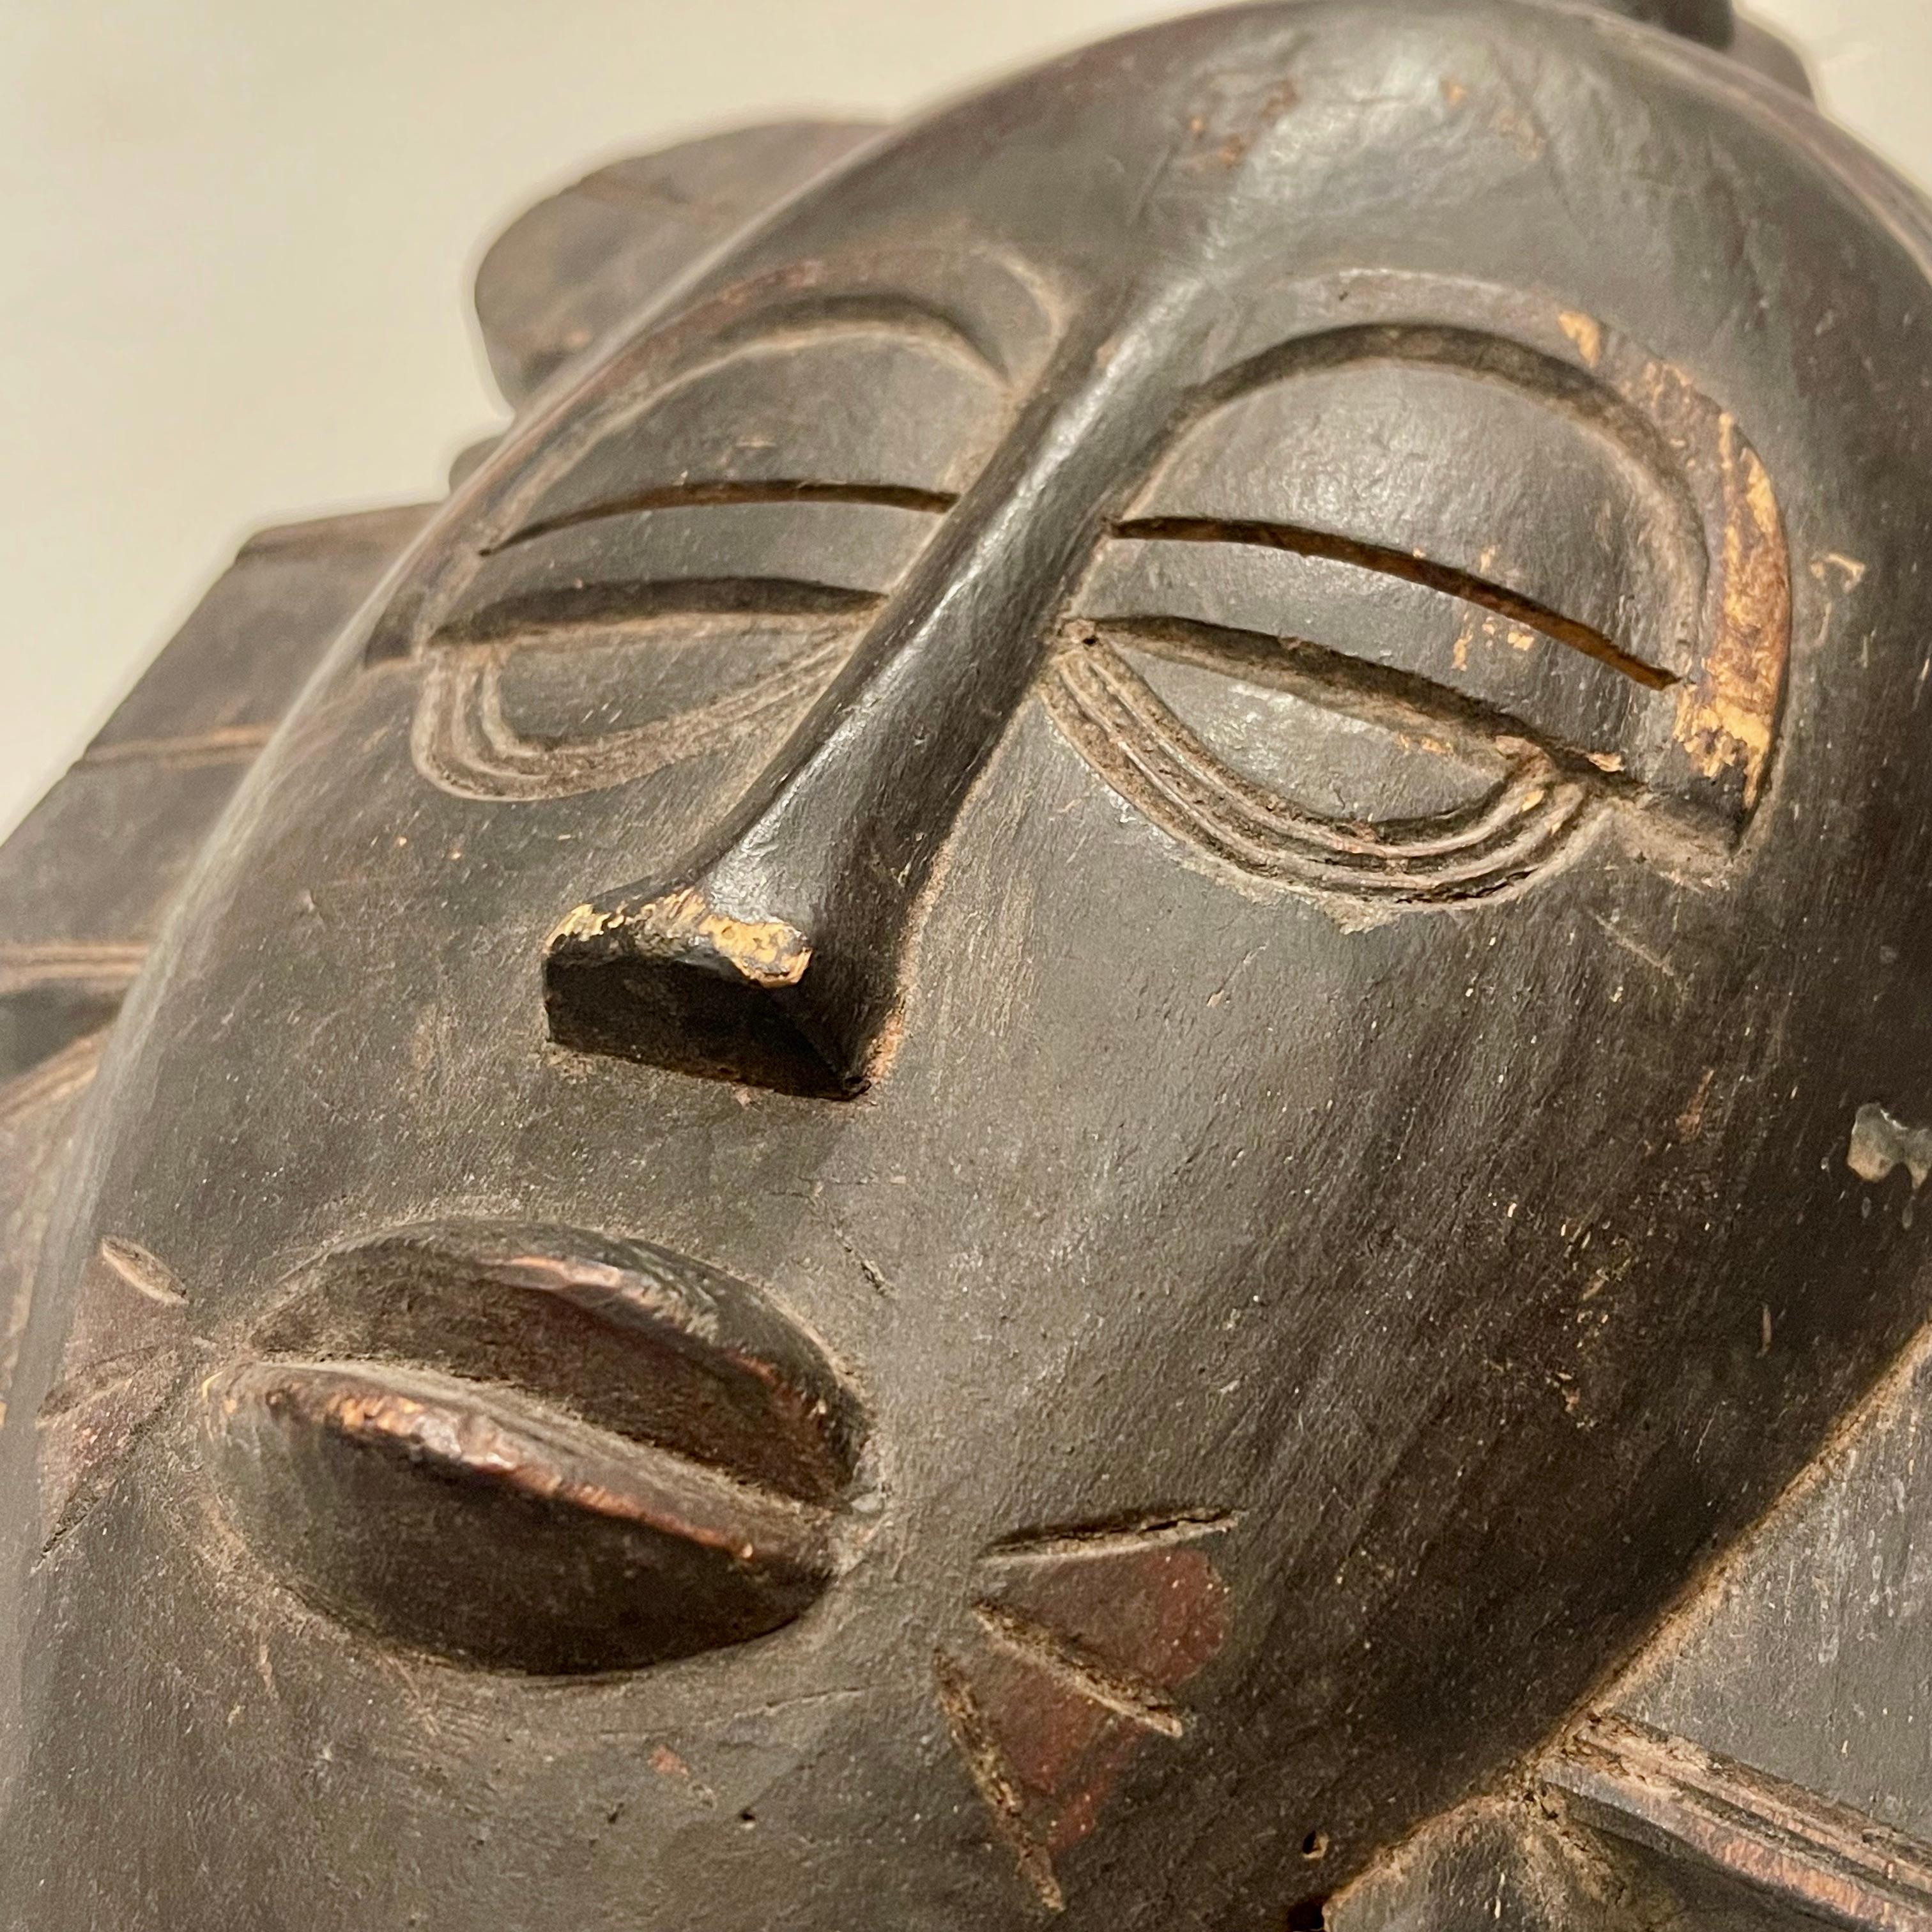 A strikingly darkly patinated and geometrically inscribed ritual mask made by the Senoufo people of the Ivory Coast. This delicately carved mask, with its characteristic arched eyebrows, oval head and narrow eyes represents a beauteous female